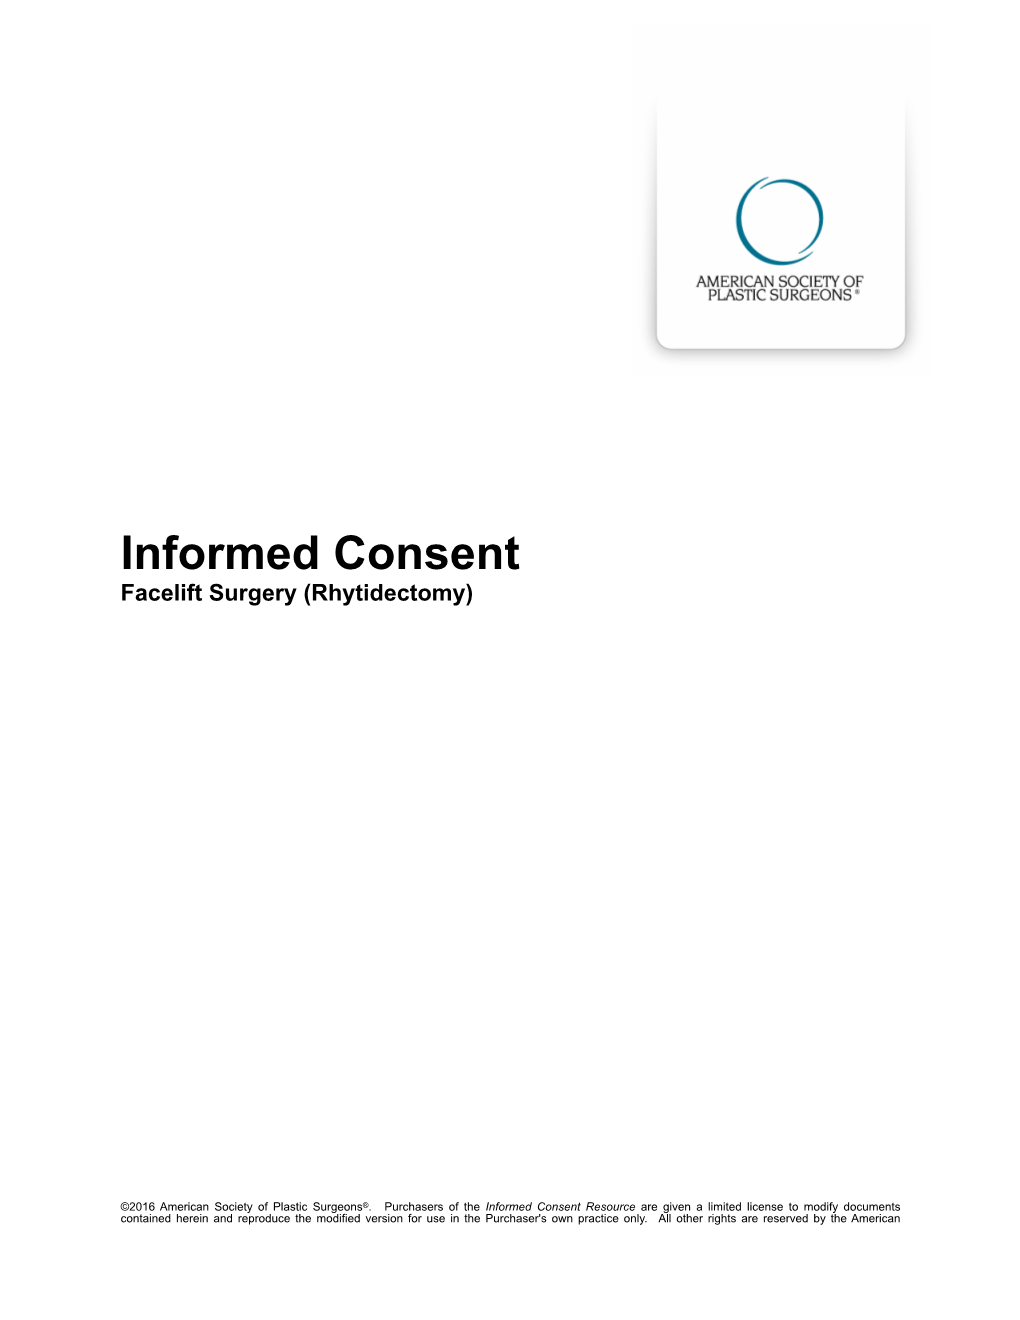 Informed Consent Facelift Surgery (Rhytidectomy)